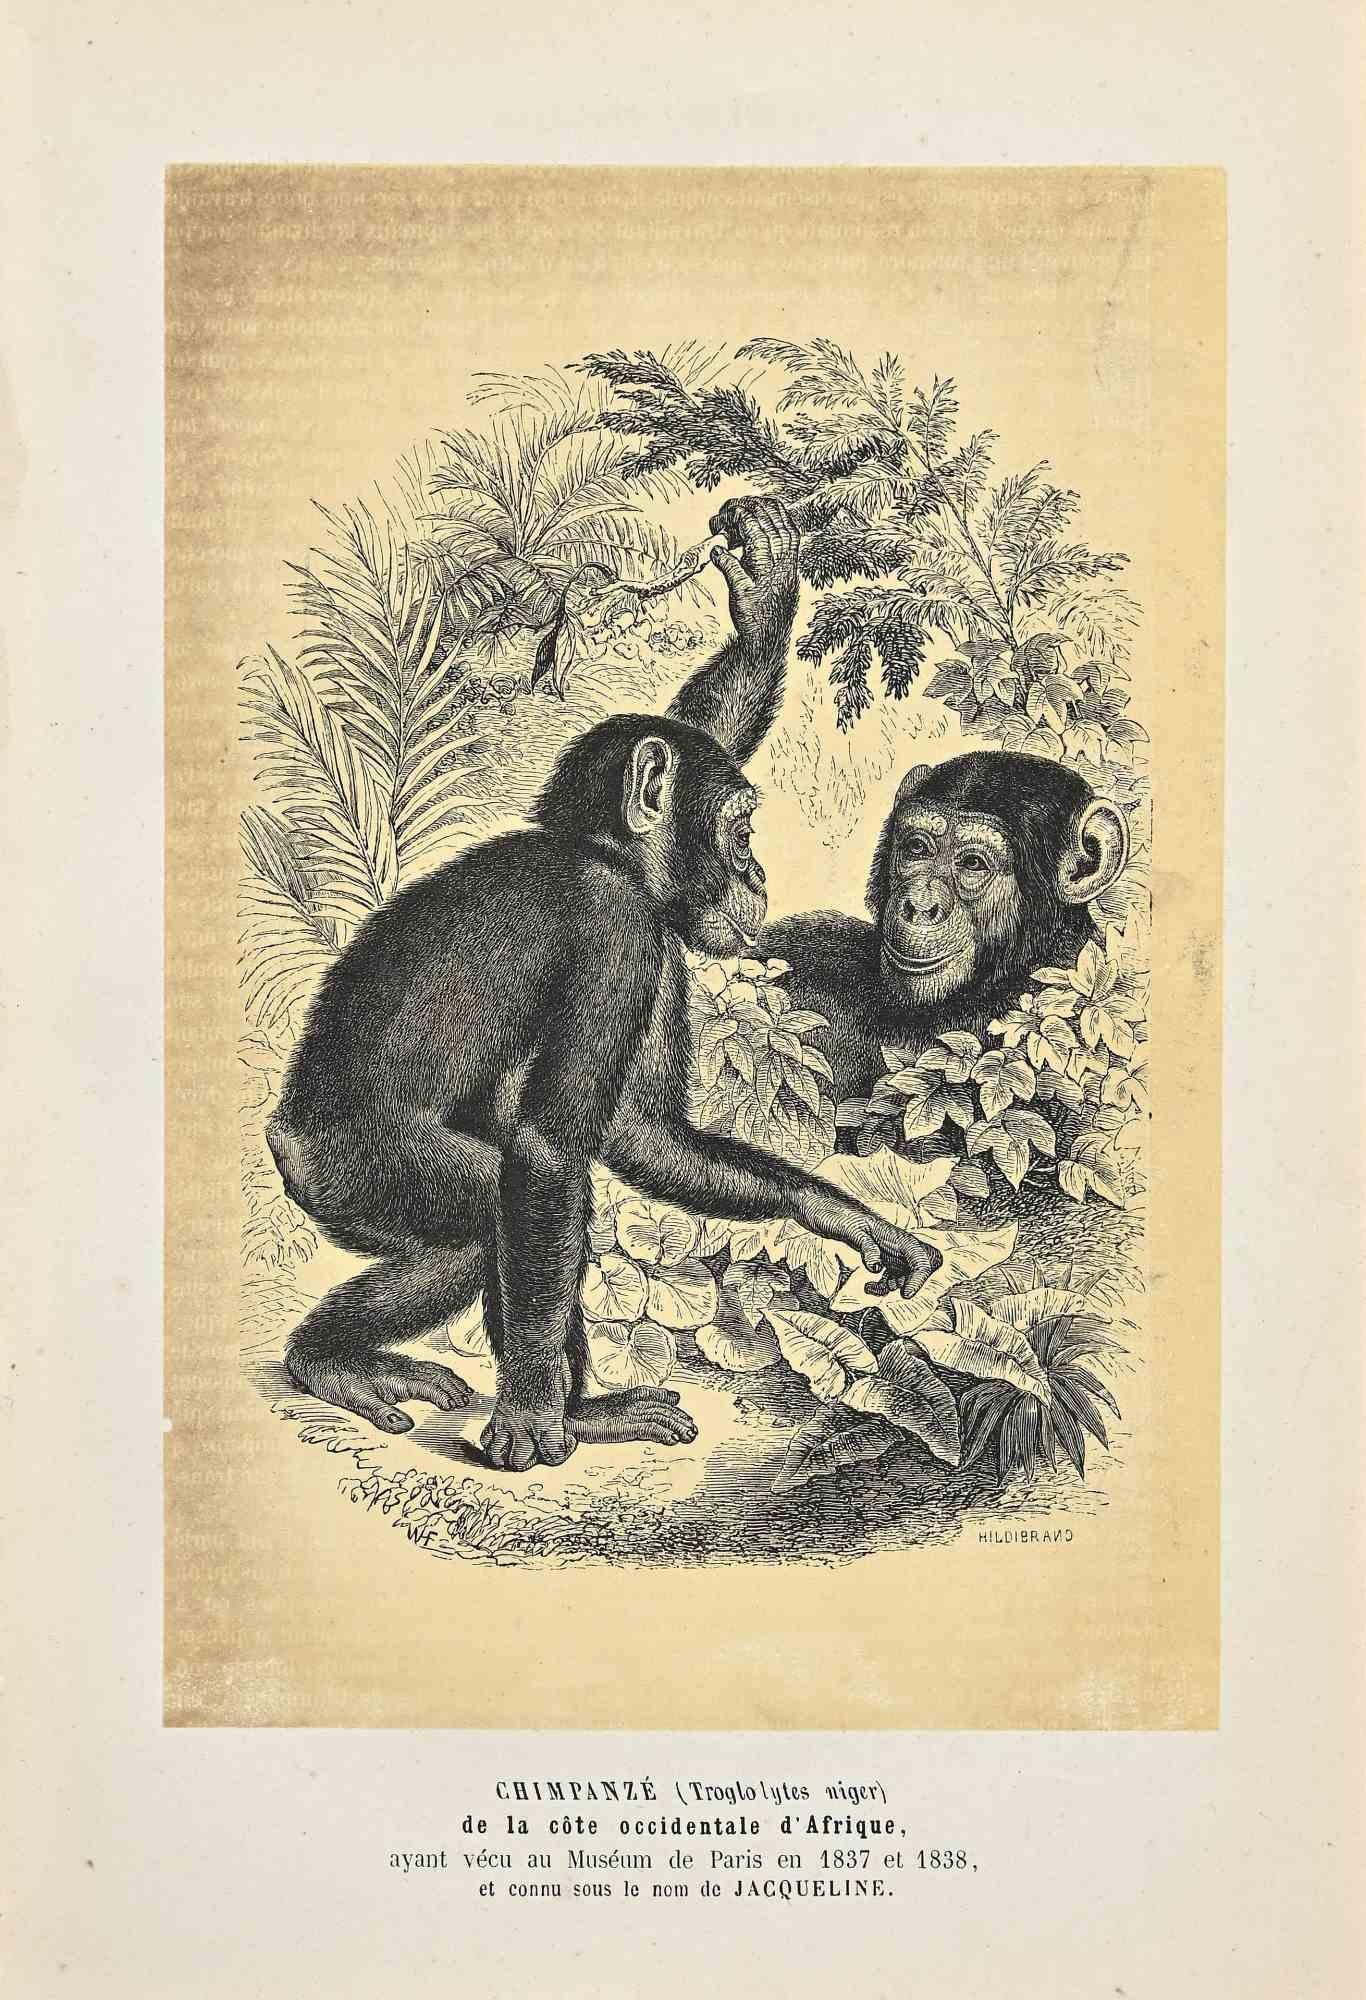 Chimpanzee is an original lithograph on ivory-colored paper, realized by Paul Gervais (1816-1879). The artwork is from The Series of "Les Trois Règnes de la Nature", and was published in 1854.

Good conditions except for some foxings.

Titled on the